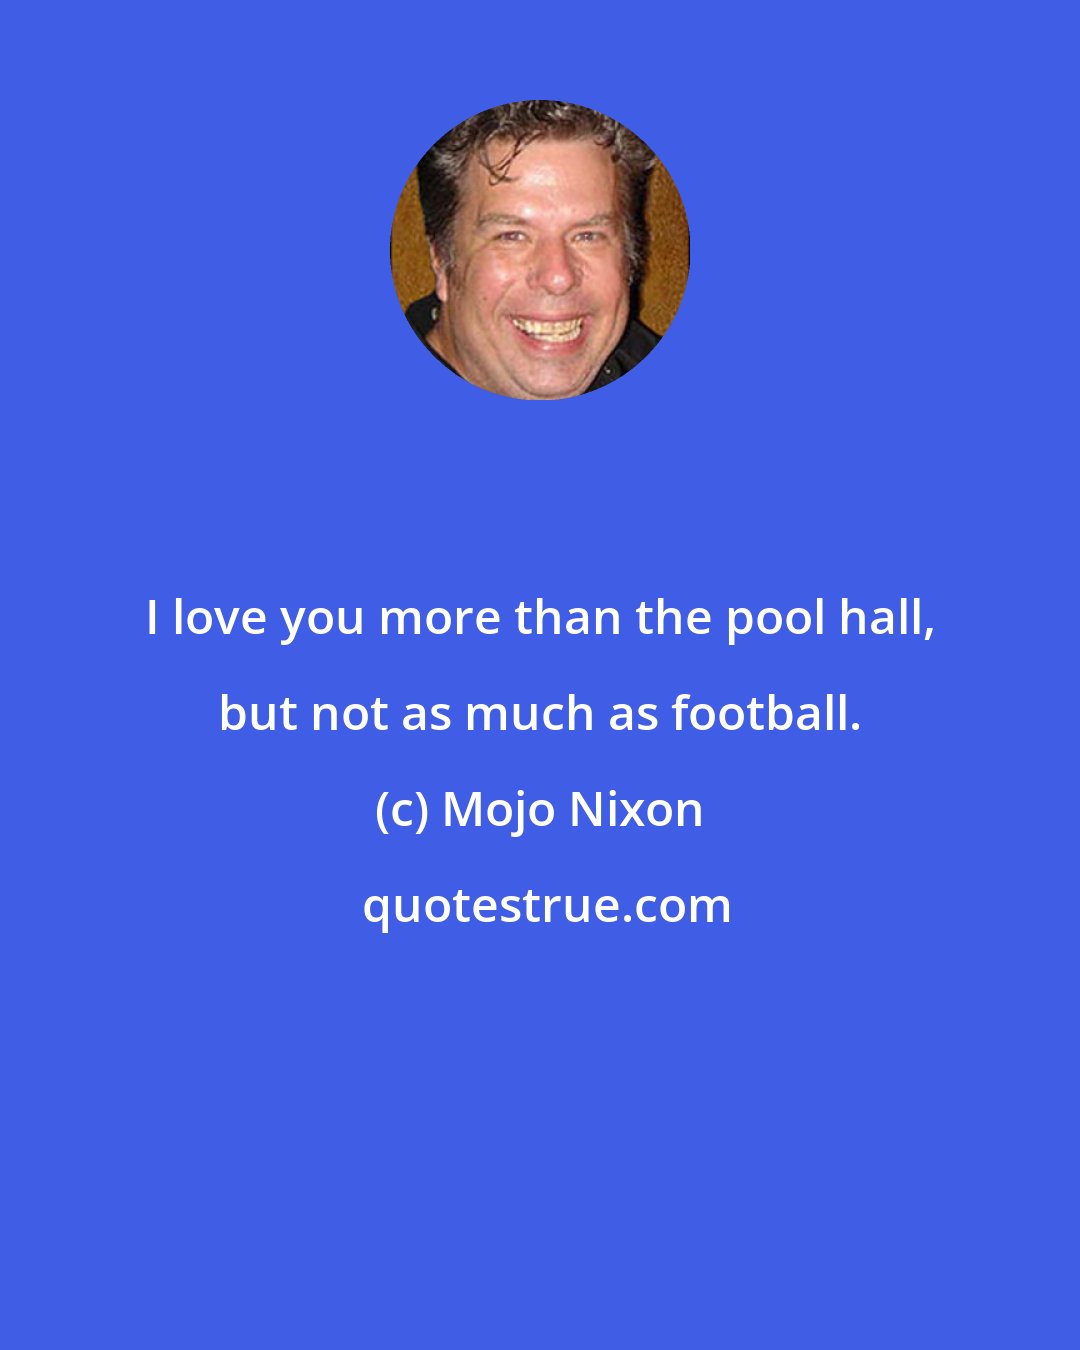 Mojo Nixon: I love you more than the pool hall, but not as much as football.